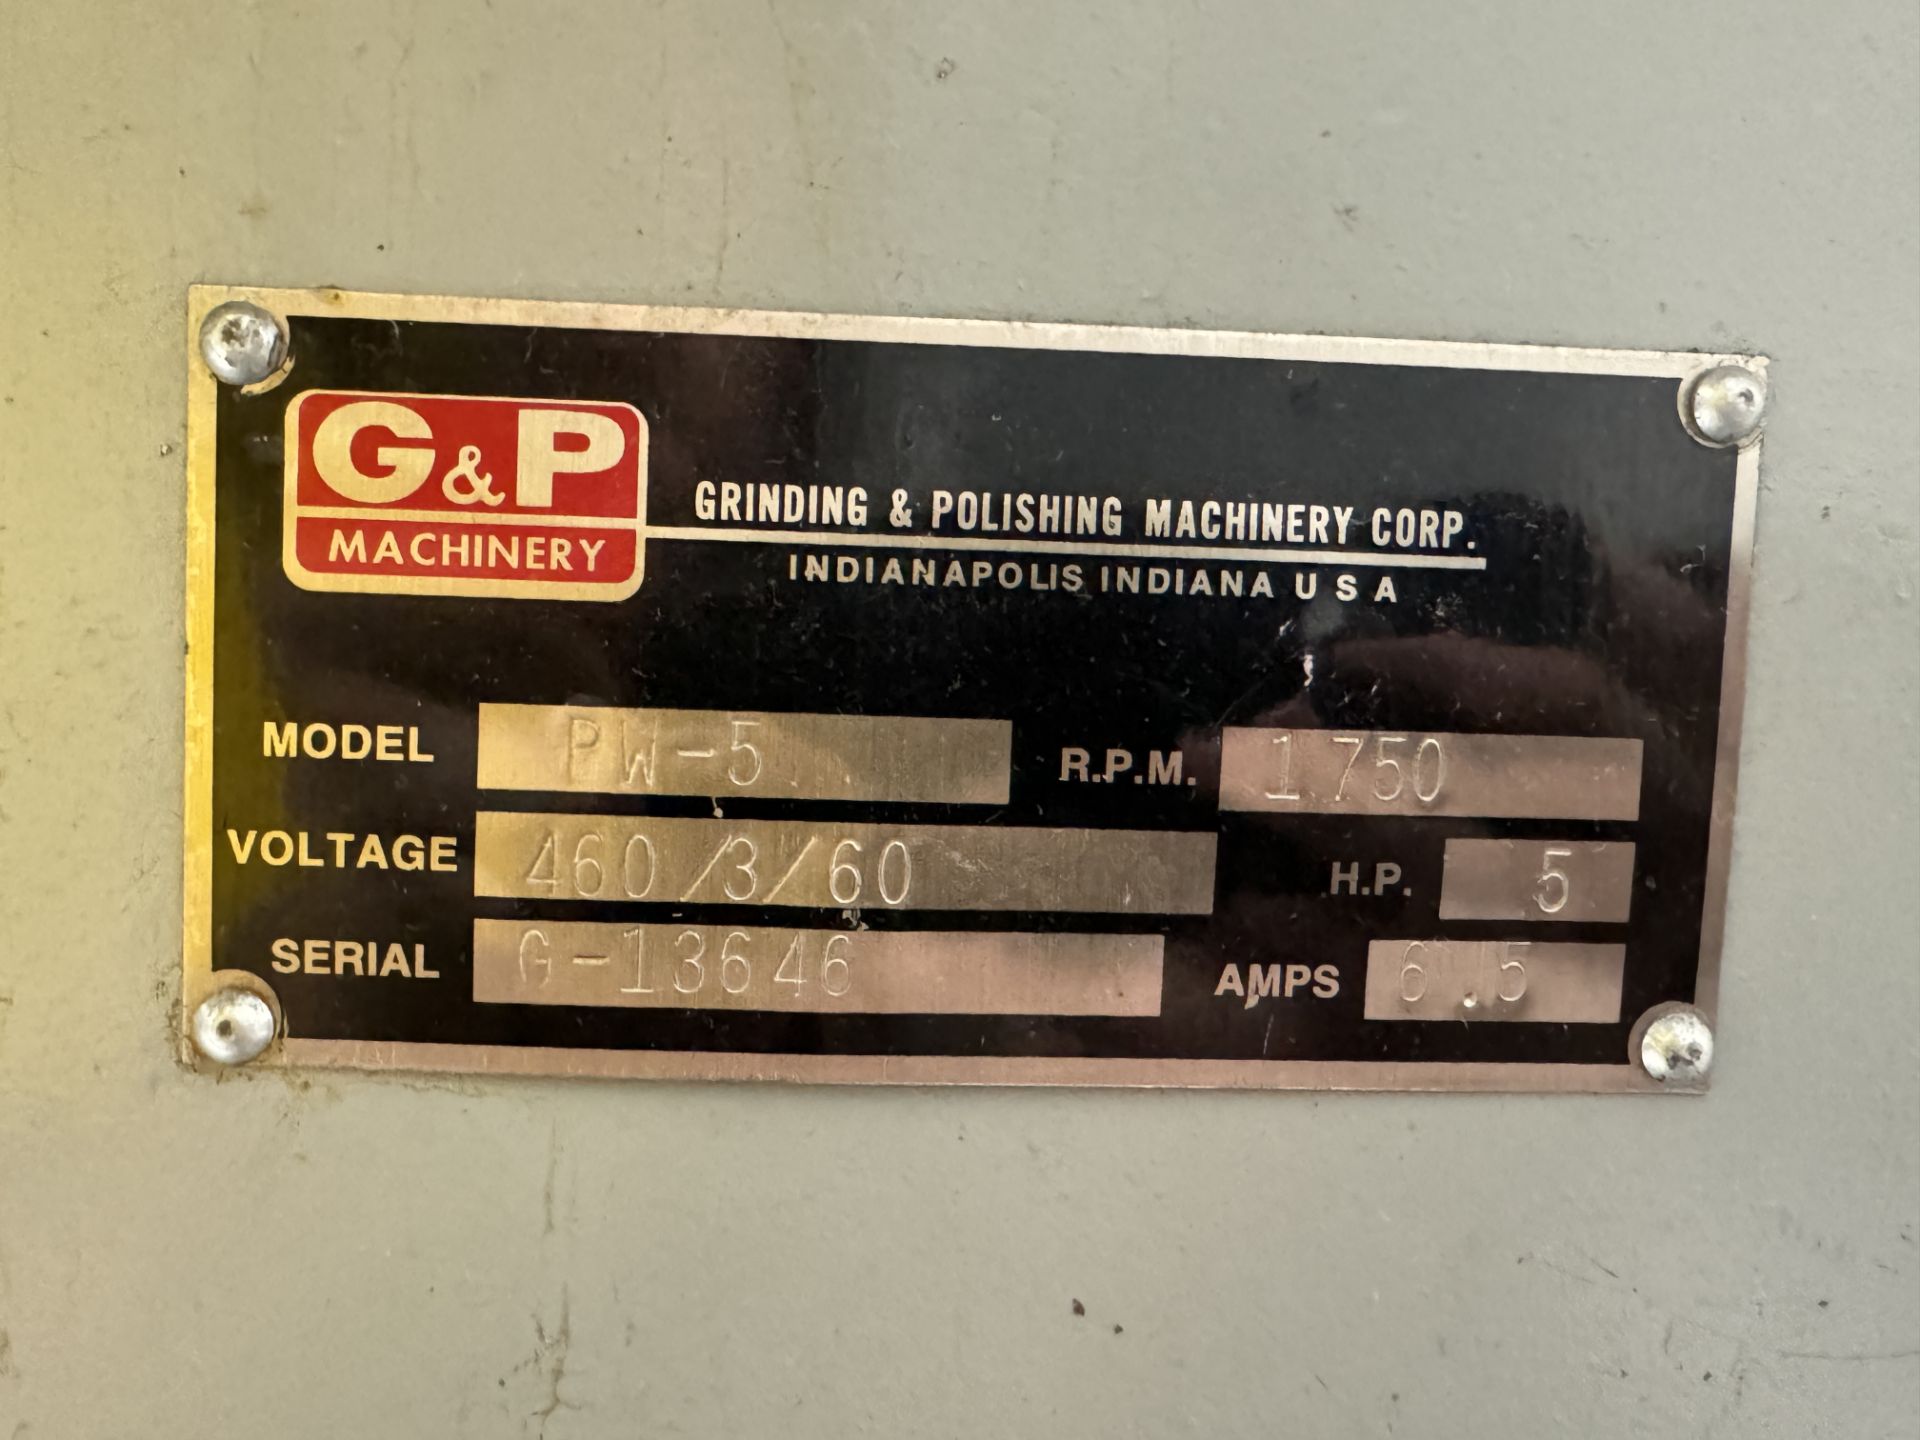 G&P MACHINERY BUFFER/GRINDER MODEL # PW-S SERIAL # G-13646; 160/3/60; SHP - Image 2 of 2